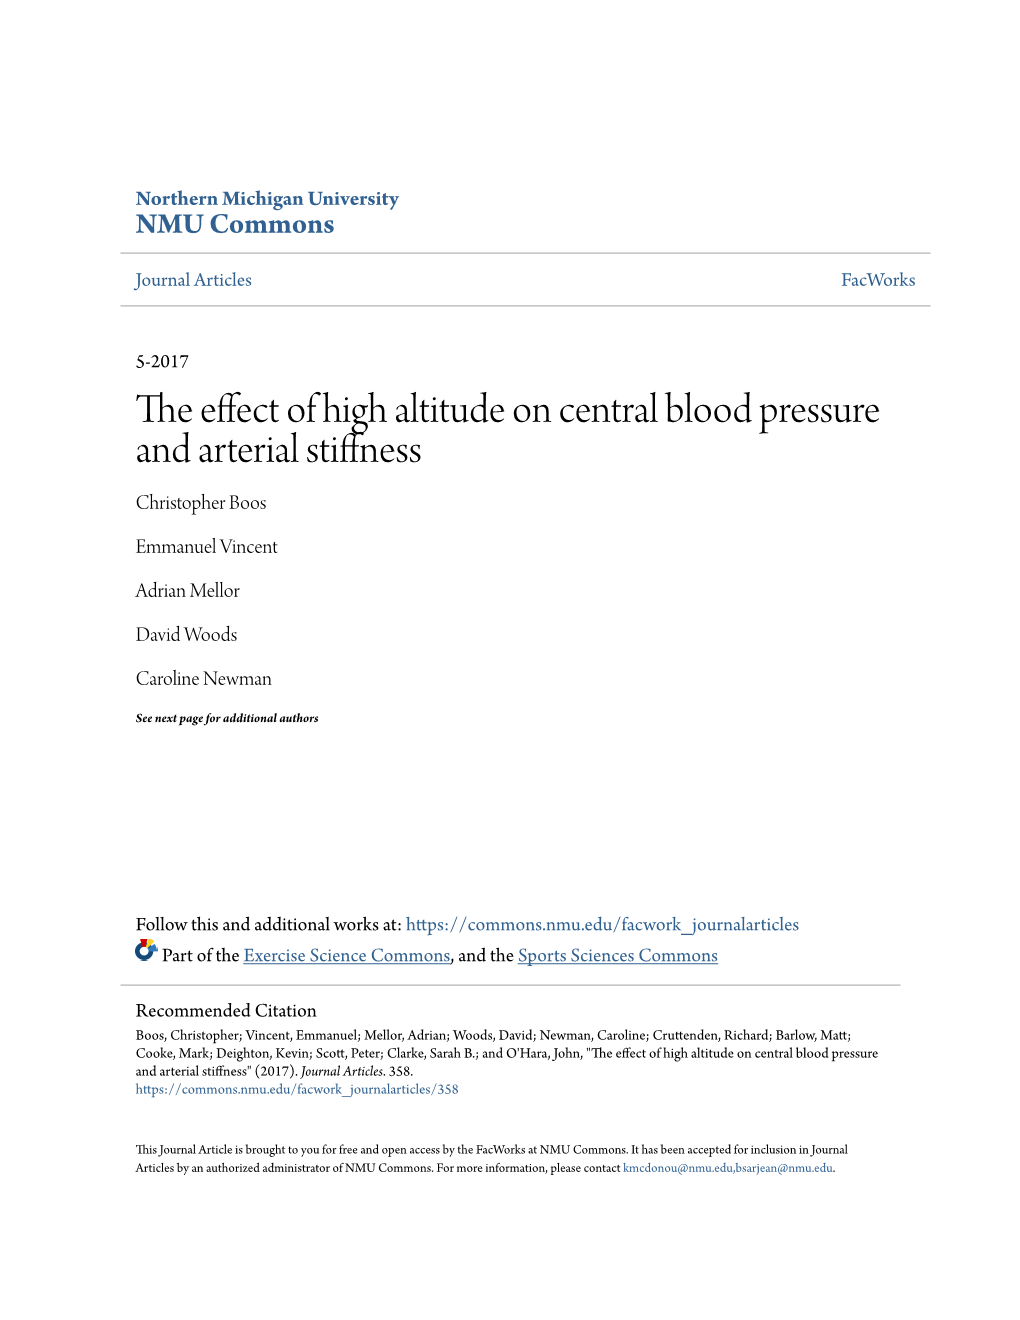 The Effect of High Altitude on Central Blood Pressure and Arterial Stiffness Christopher Boos